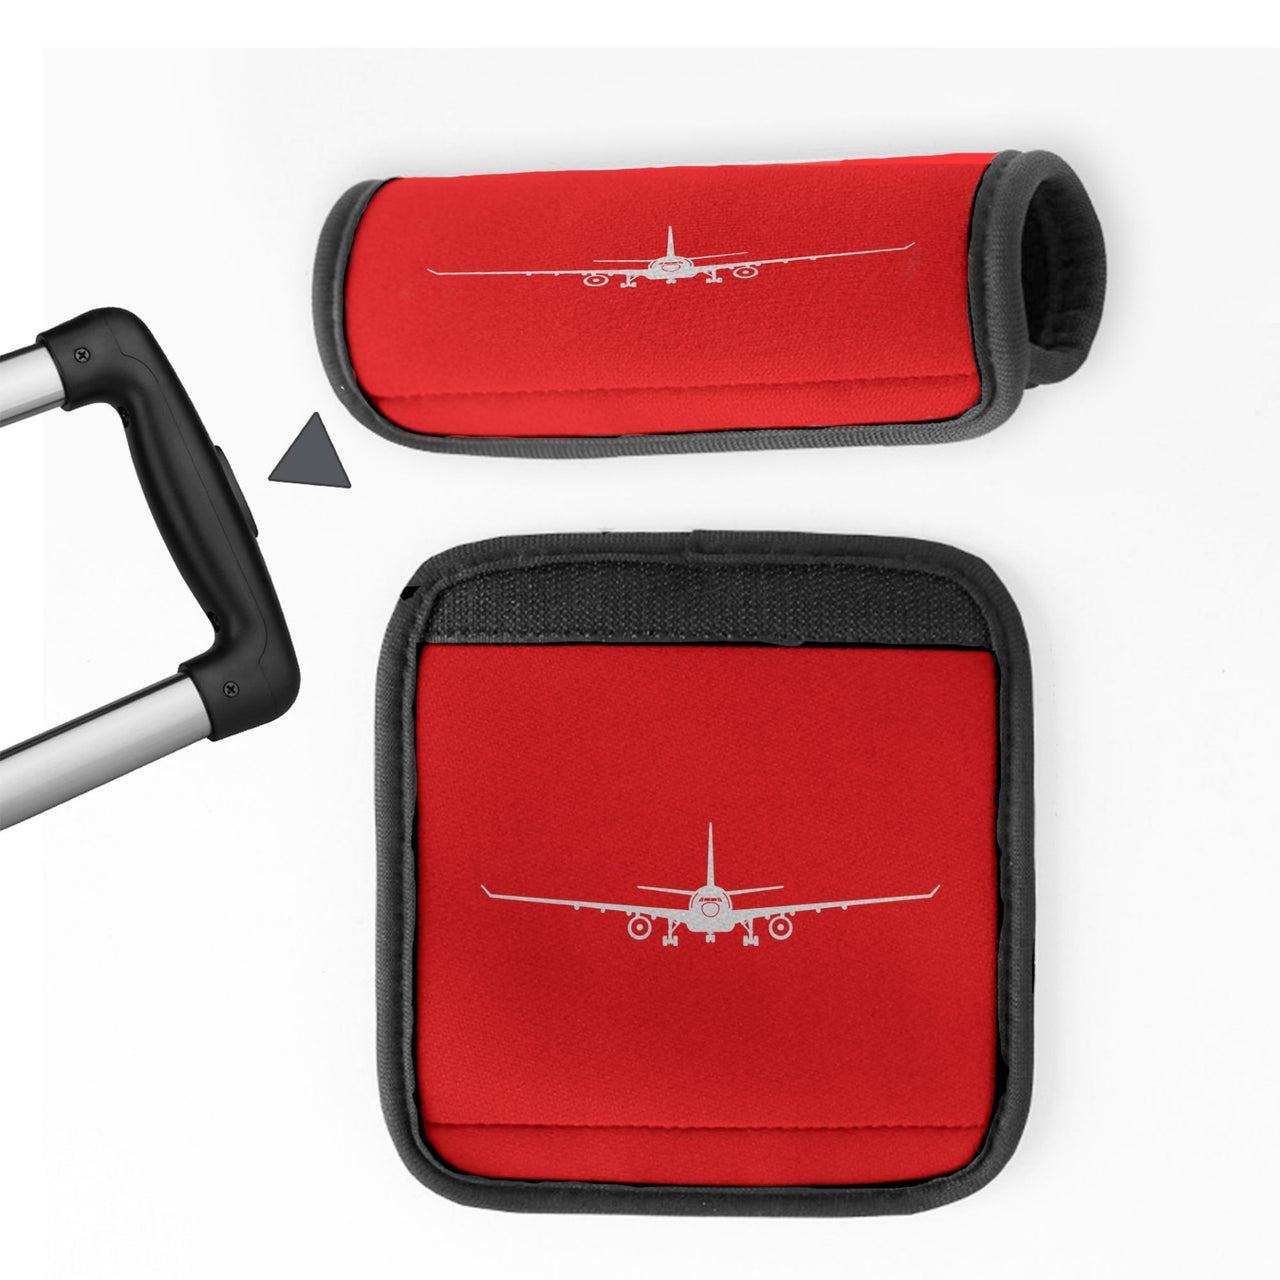 Airbus A330 Silhouette Designed Neoprene Luggage Handle Covers